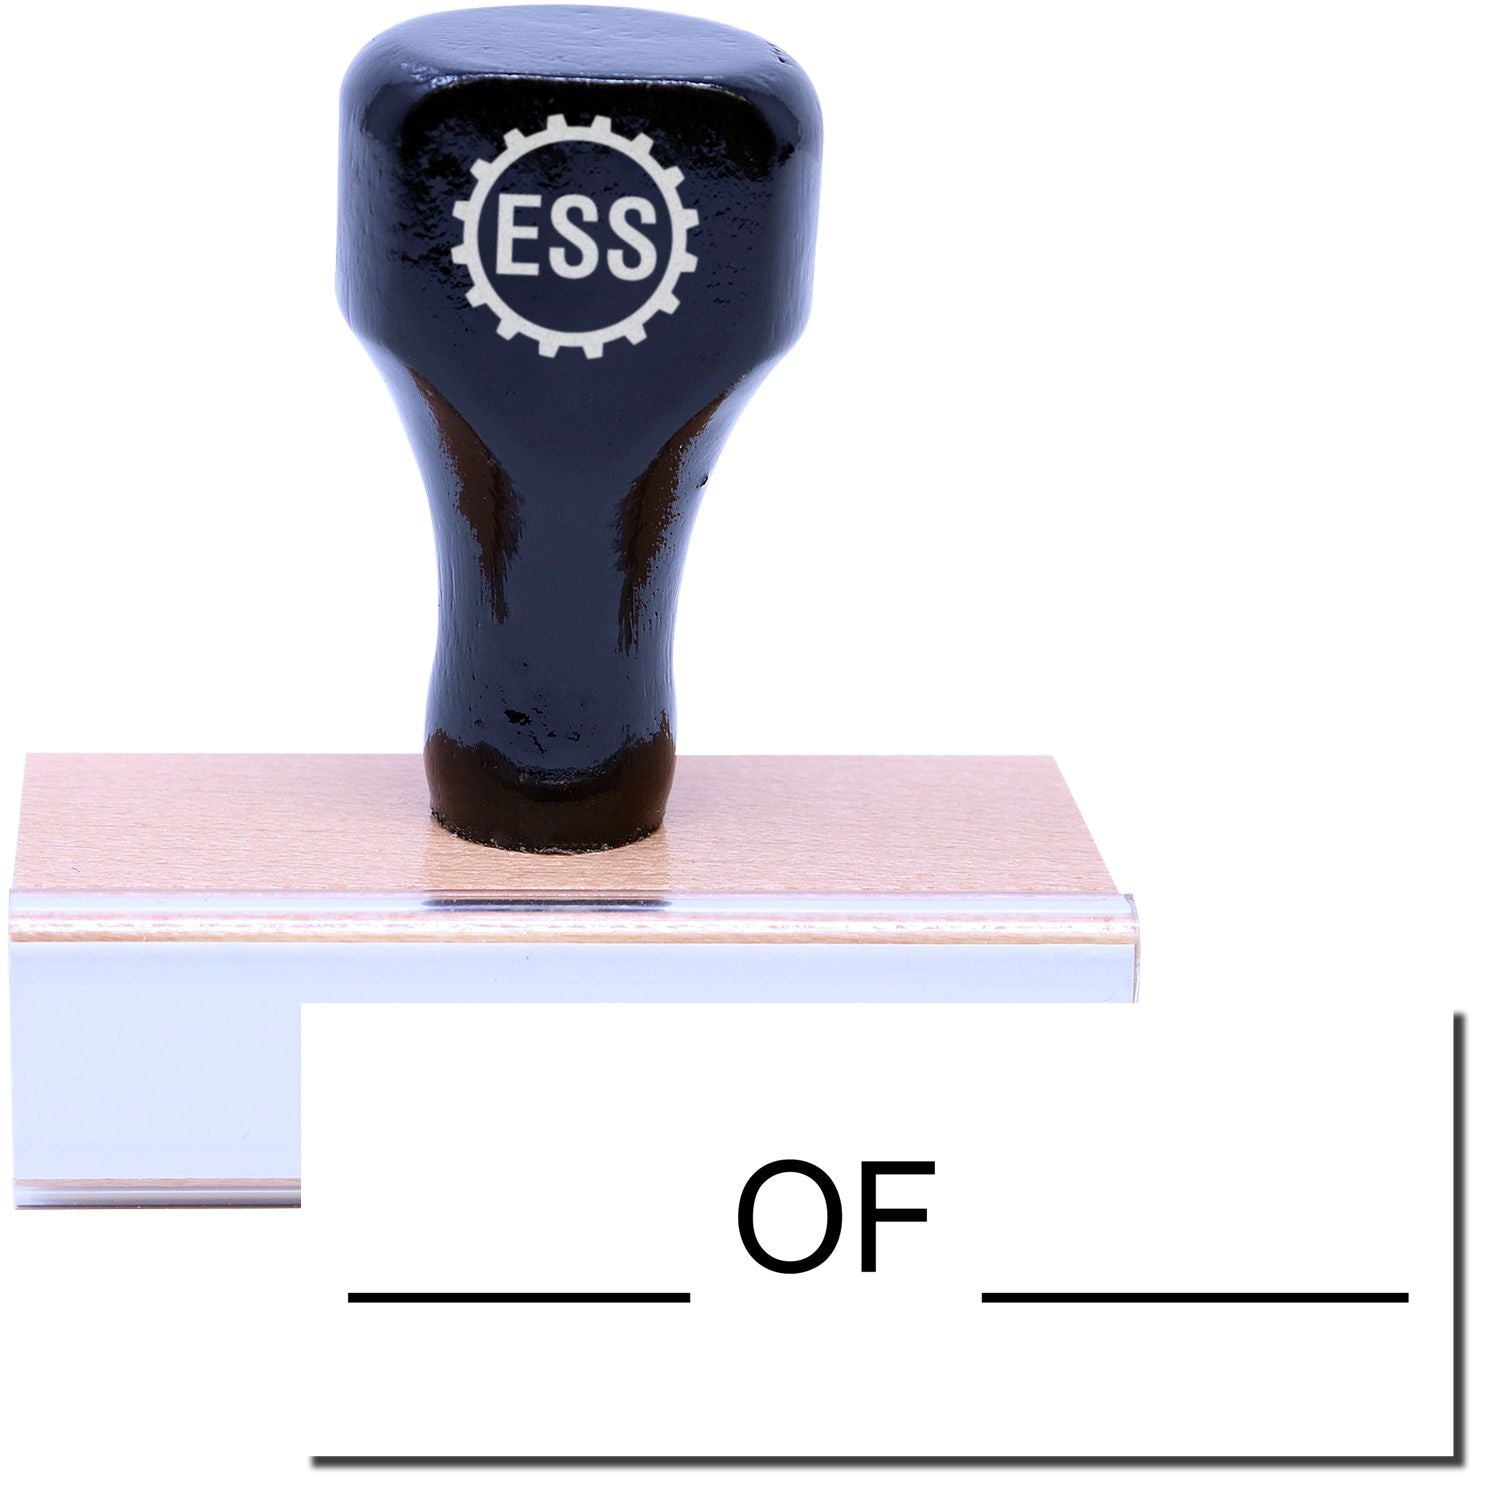 A stock office rubber stamp with a stamped image showing how the text "OF" with a line both below and after the text is displayed after stamping.